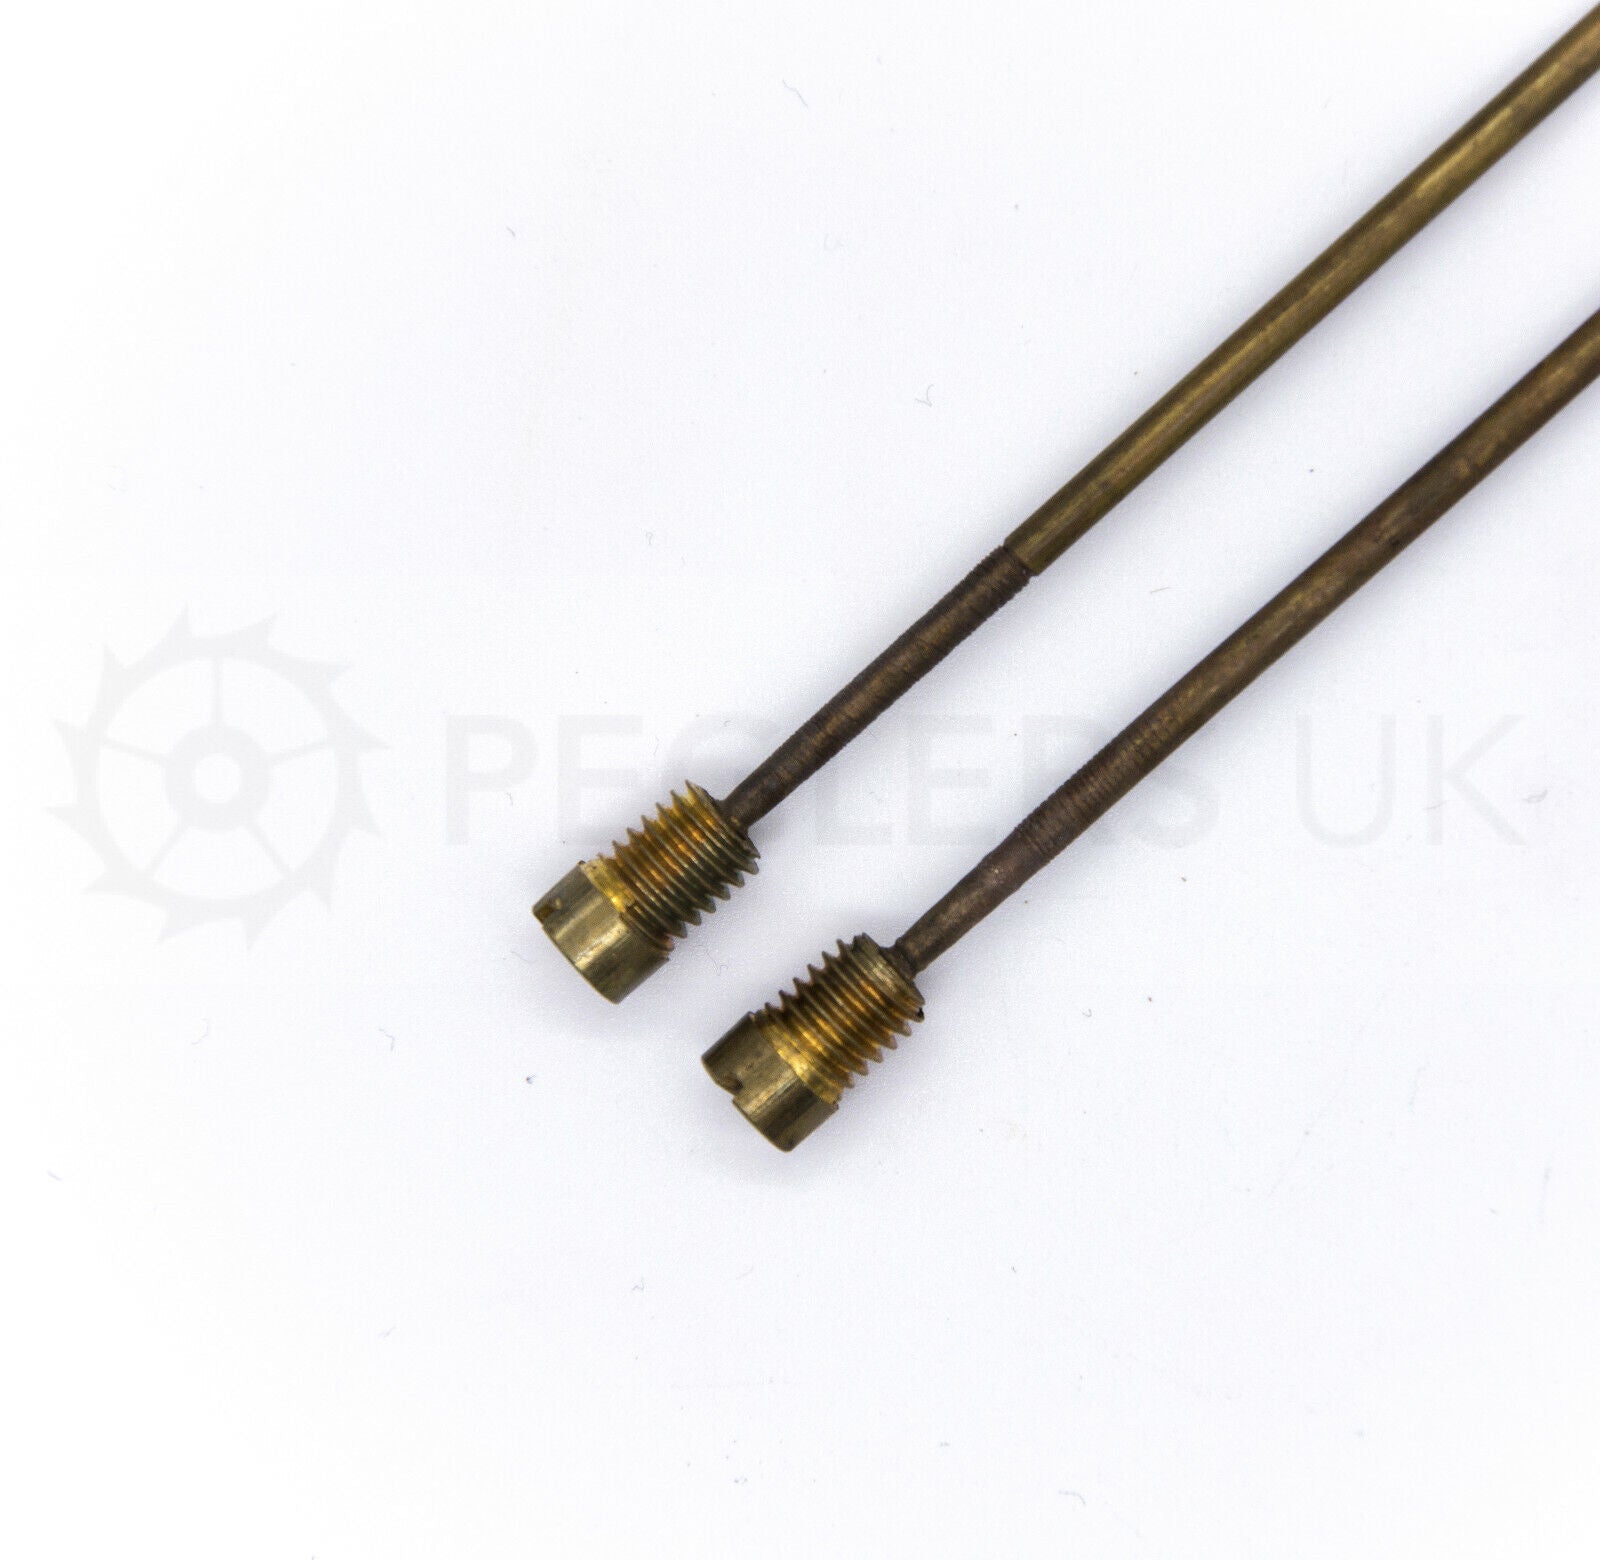 2x Bronze Gong Rods for Clocks 205 & 195mm